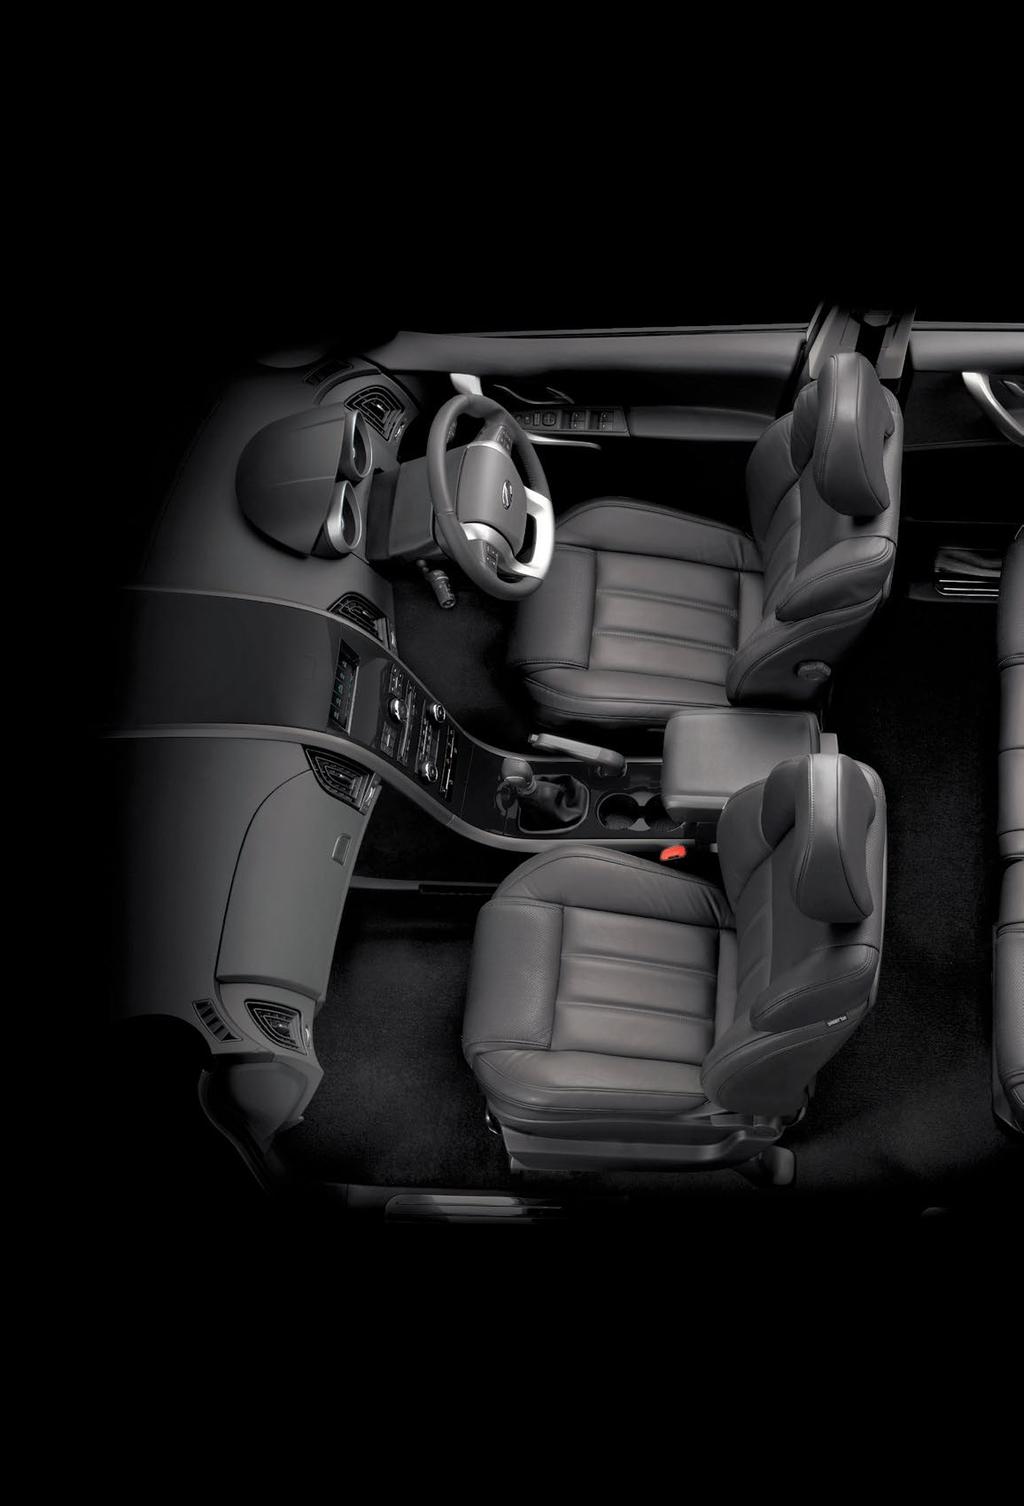 NEW AGE XUV500 FEATURES 7 Leather seats for easy cleaning 2.